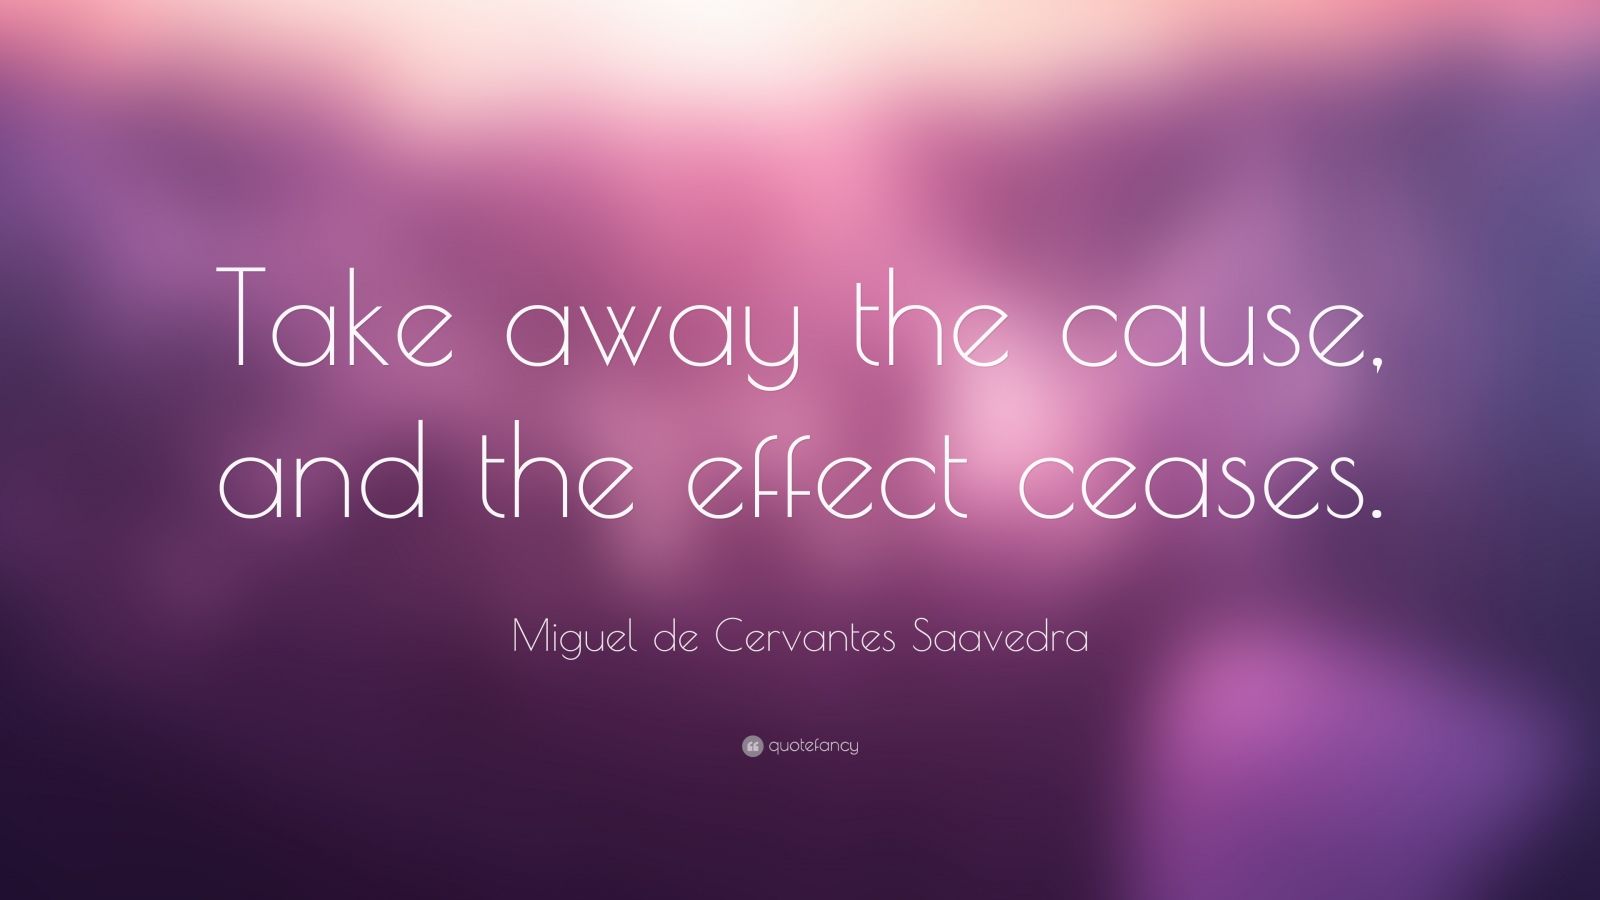 Miguel de Cervantes Saavedra Quote: “Take away the cause, and the